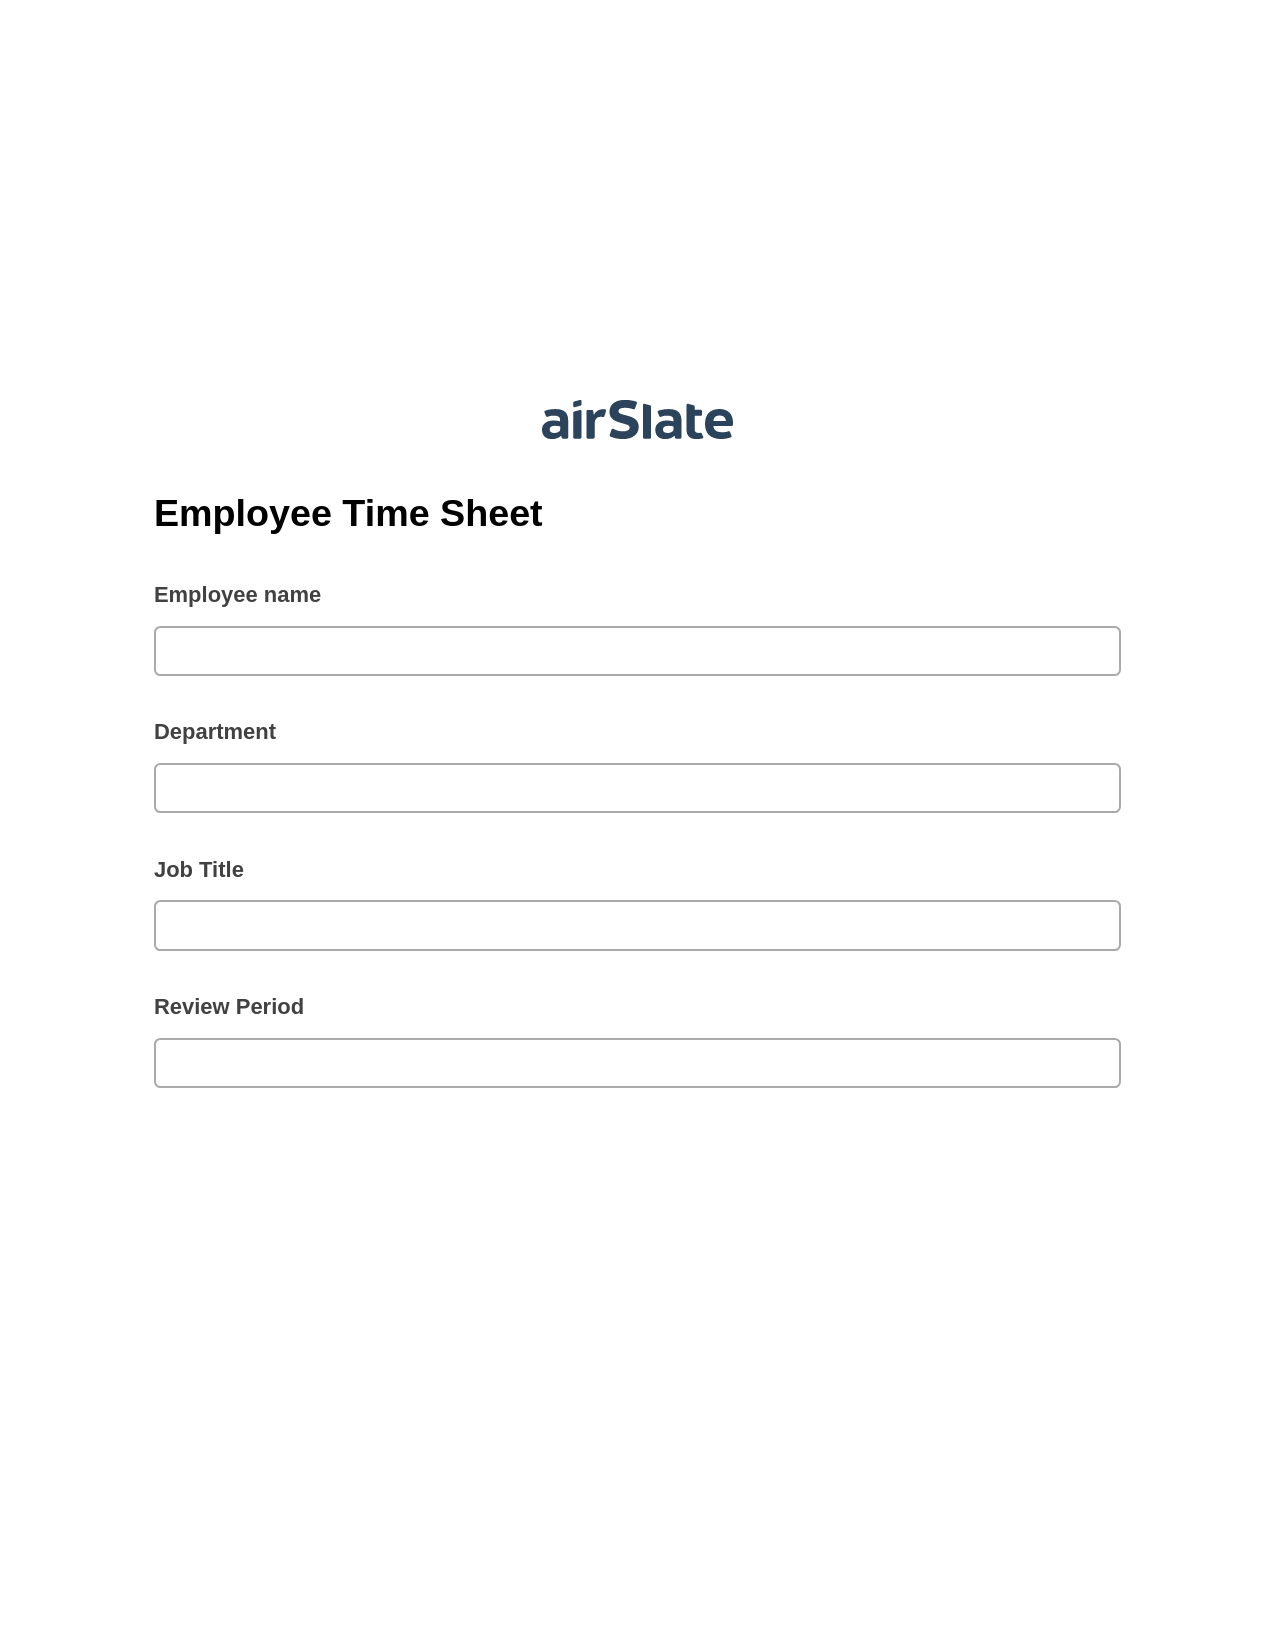 Multirole Employee Time Sheet Prefill from NetSuite records, Create slate addon, Export to NetSuite Bot